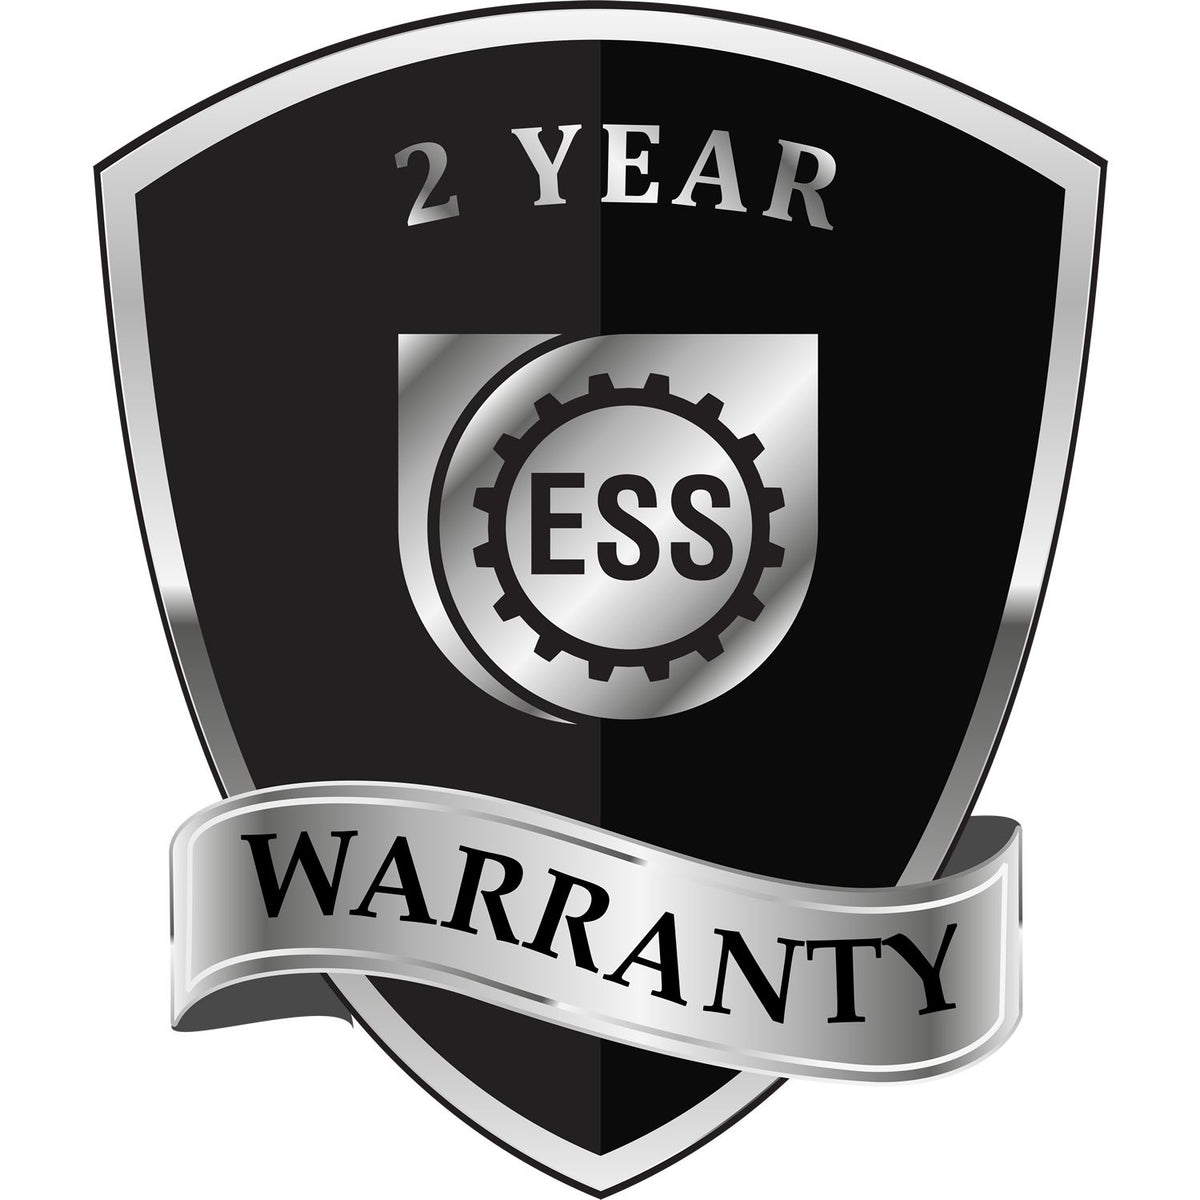 A badge or emblem showing a warranty icon for the Heavy Duty Cast Iron California Engineer Seal Embosser